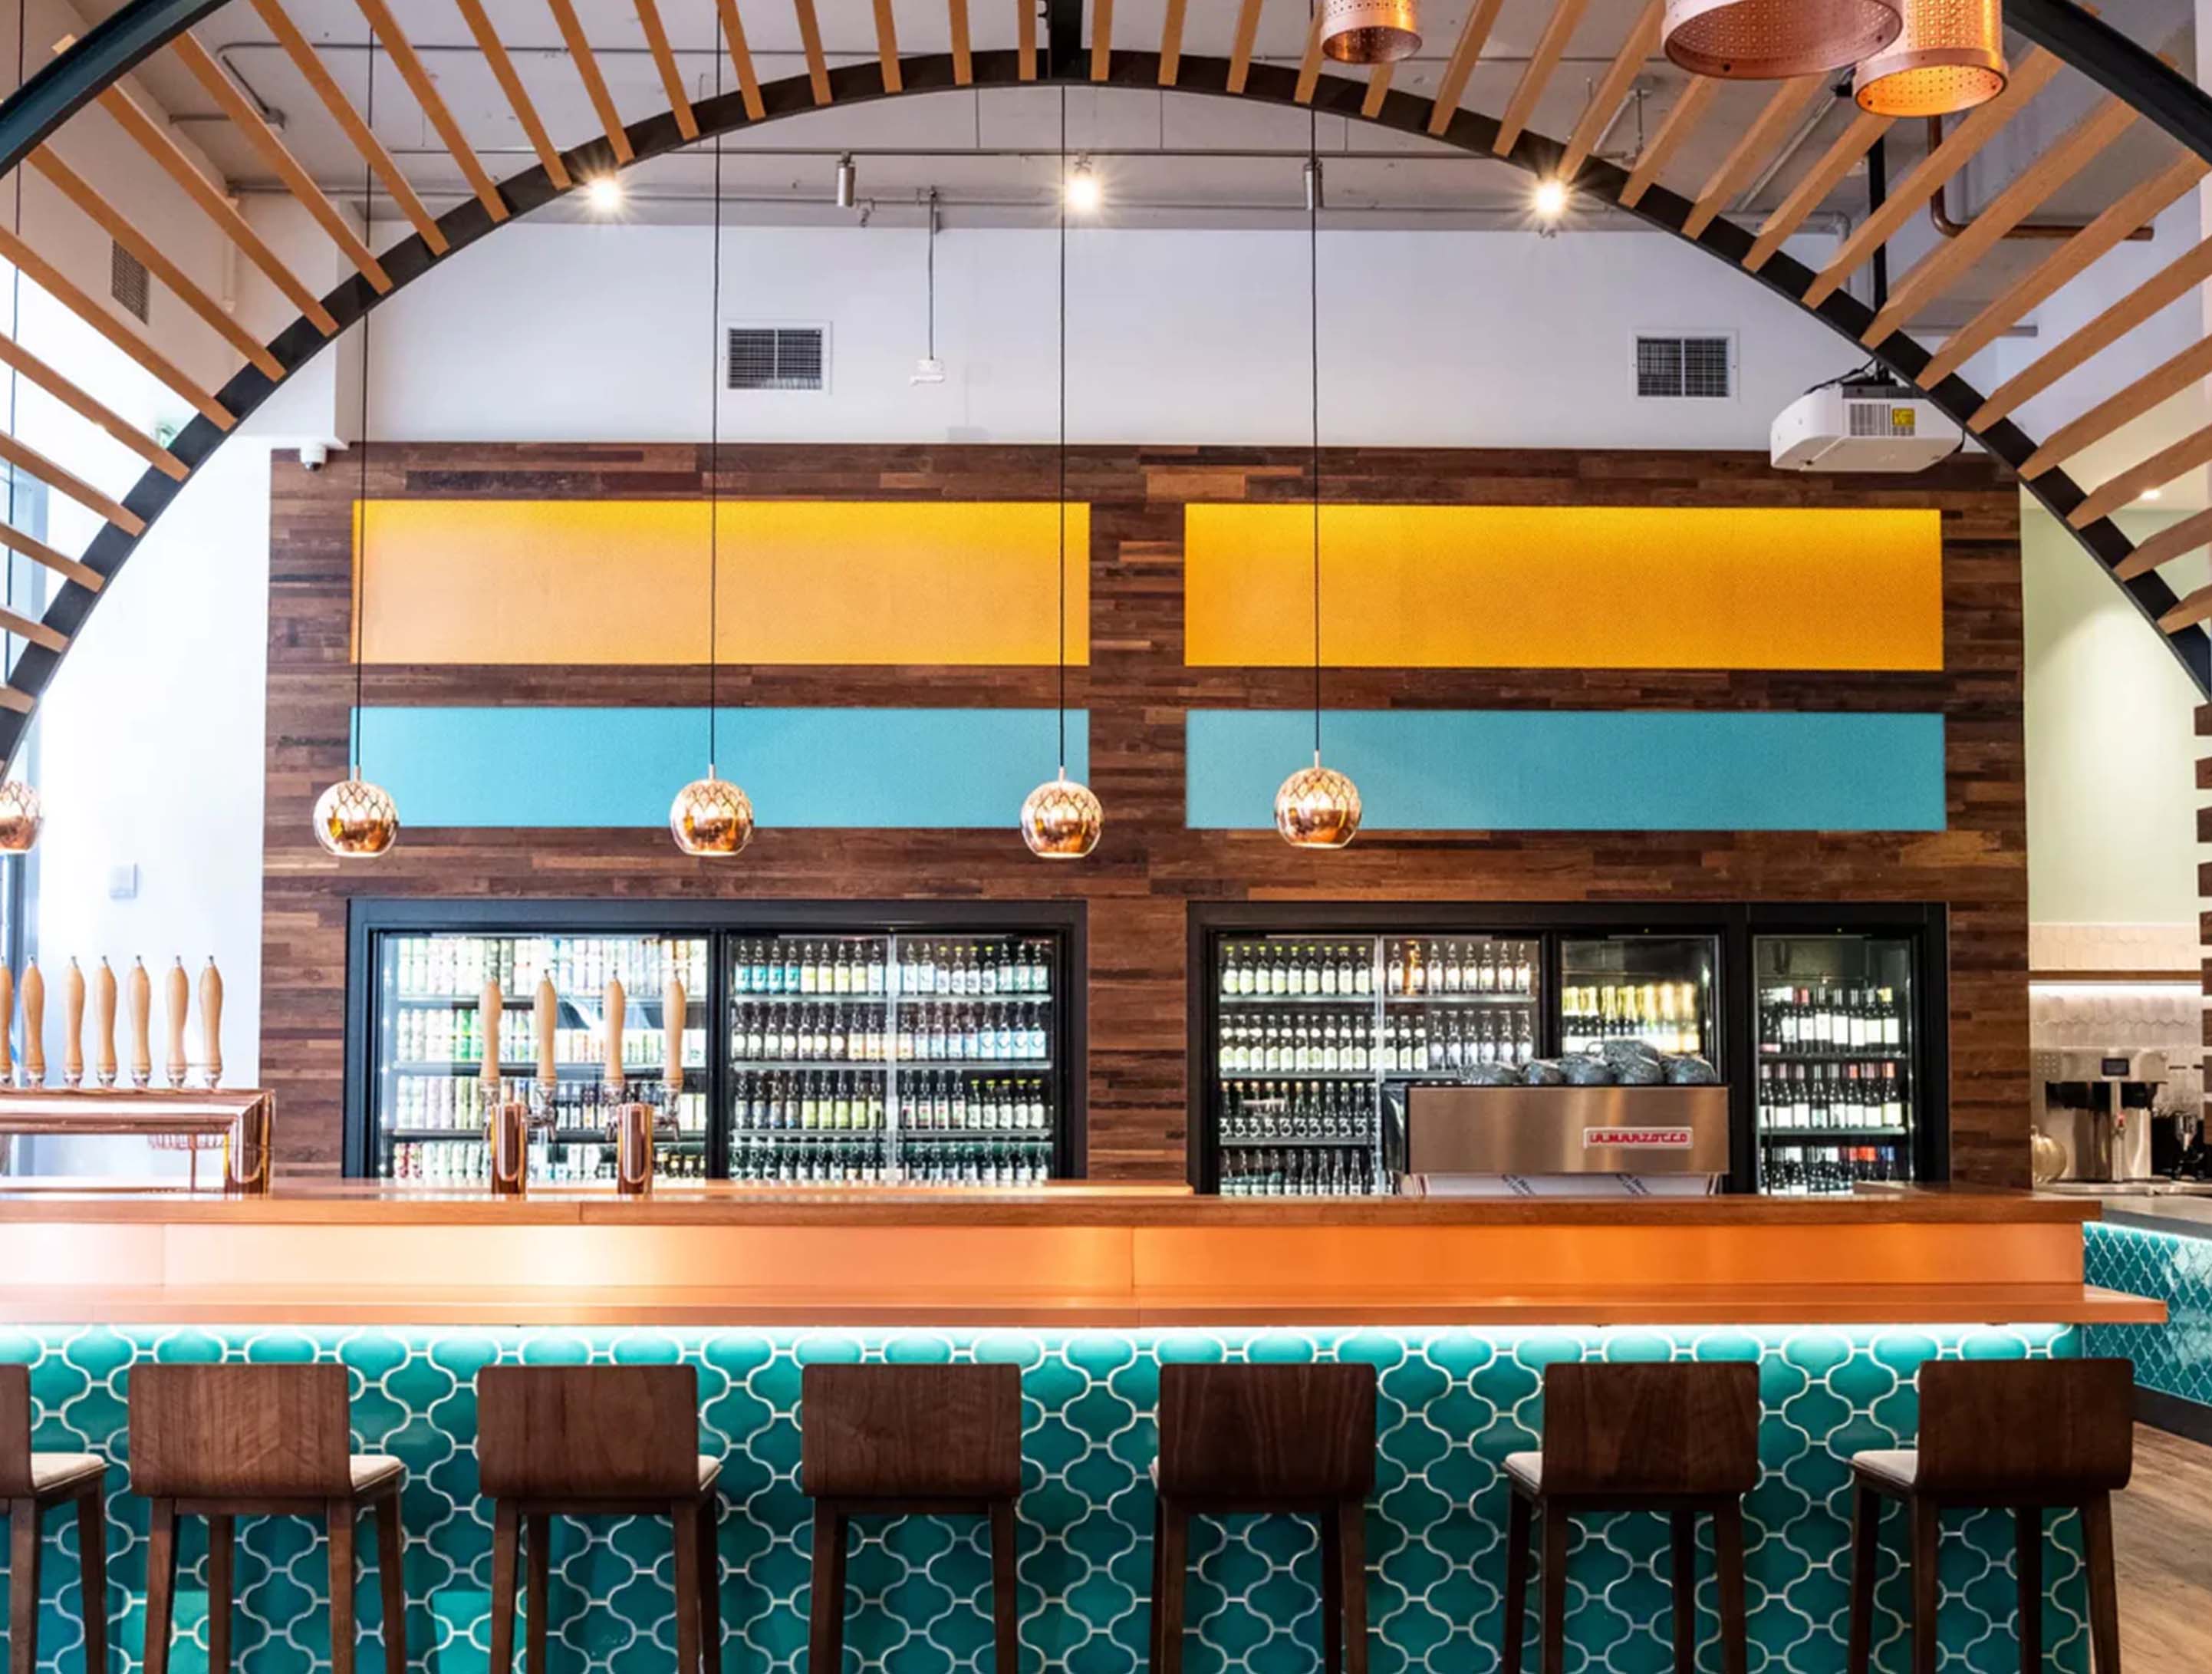 Pro Tips // How to Hang Pendant Lights Above a Bar